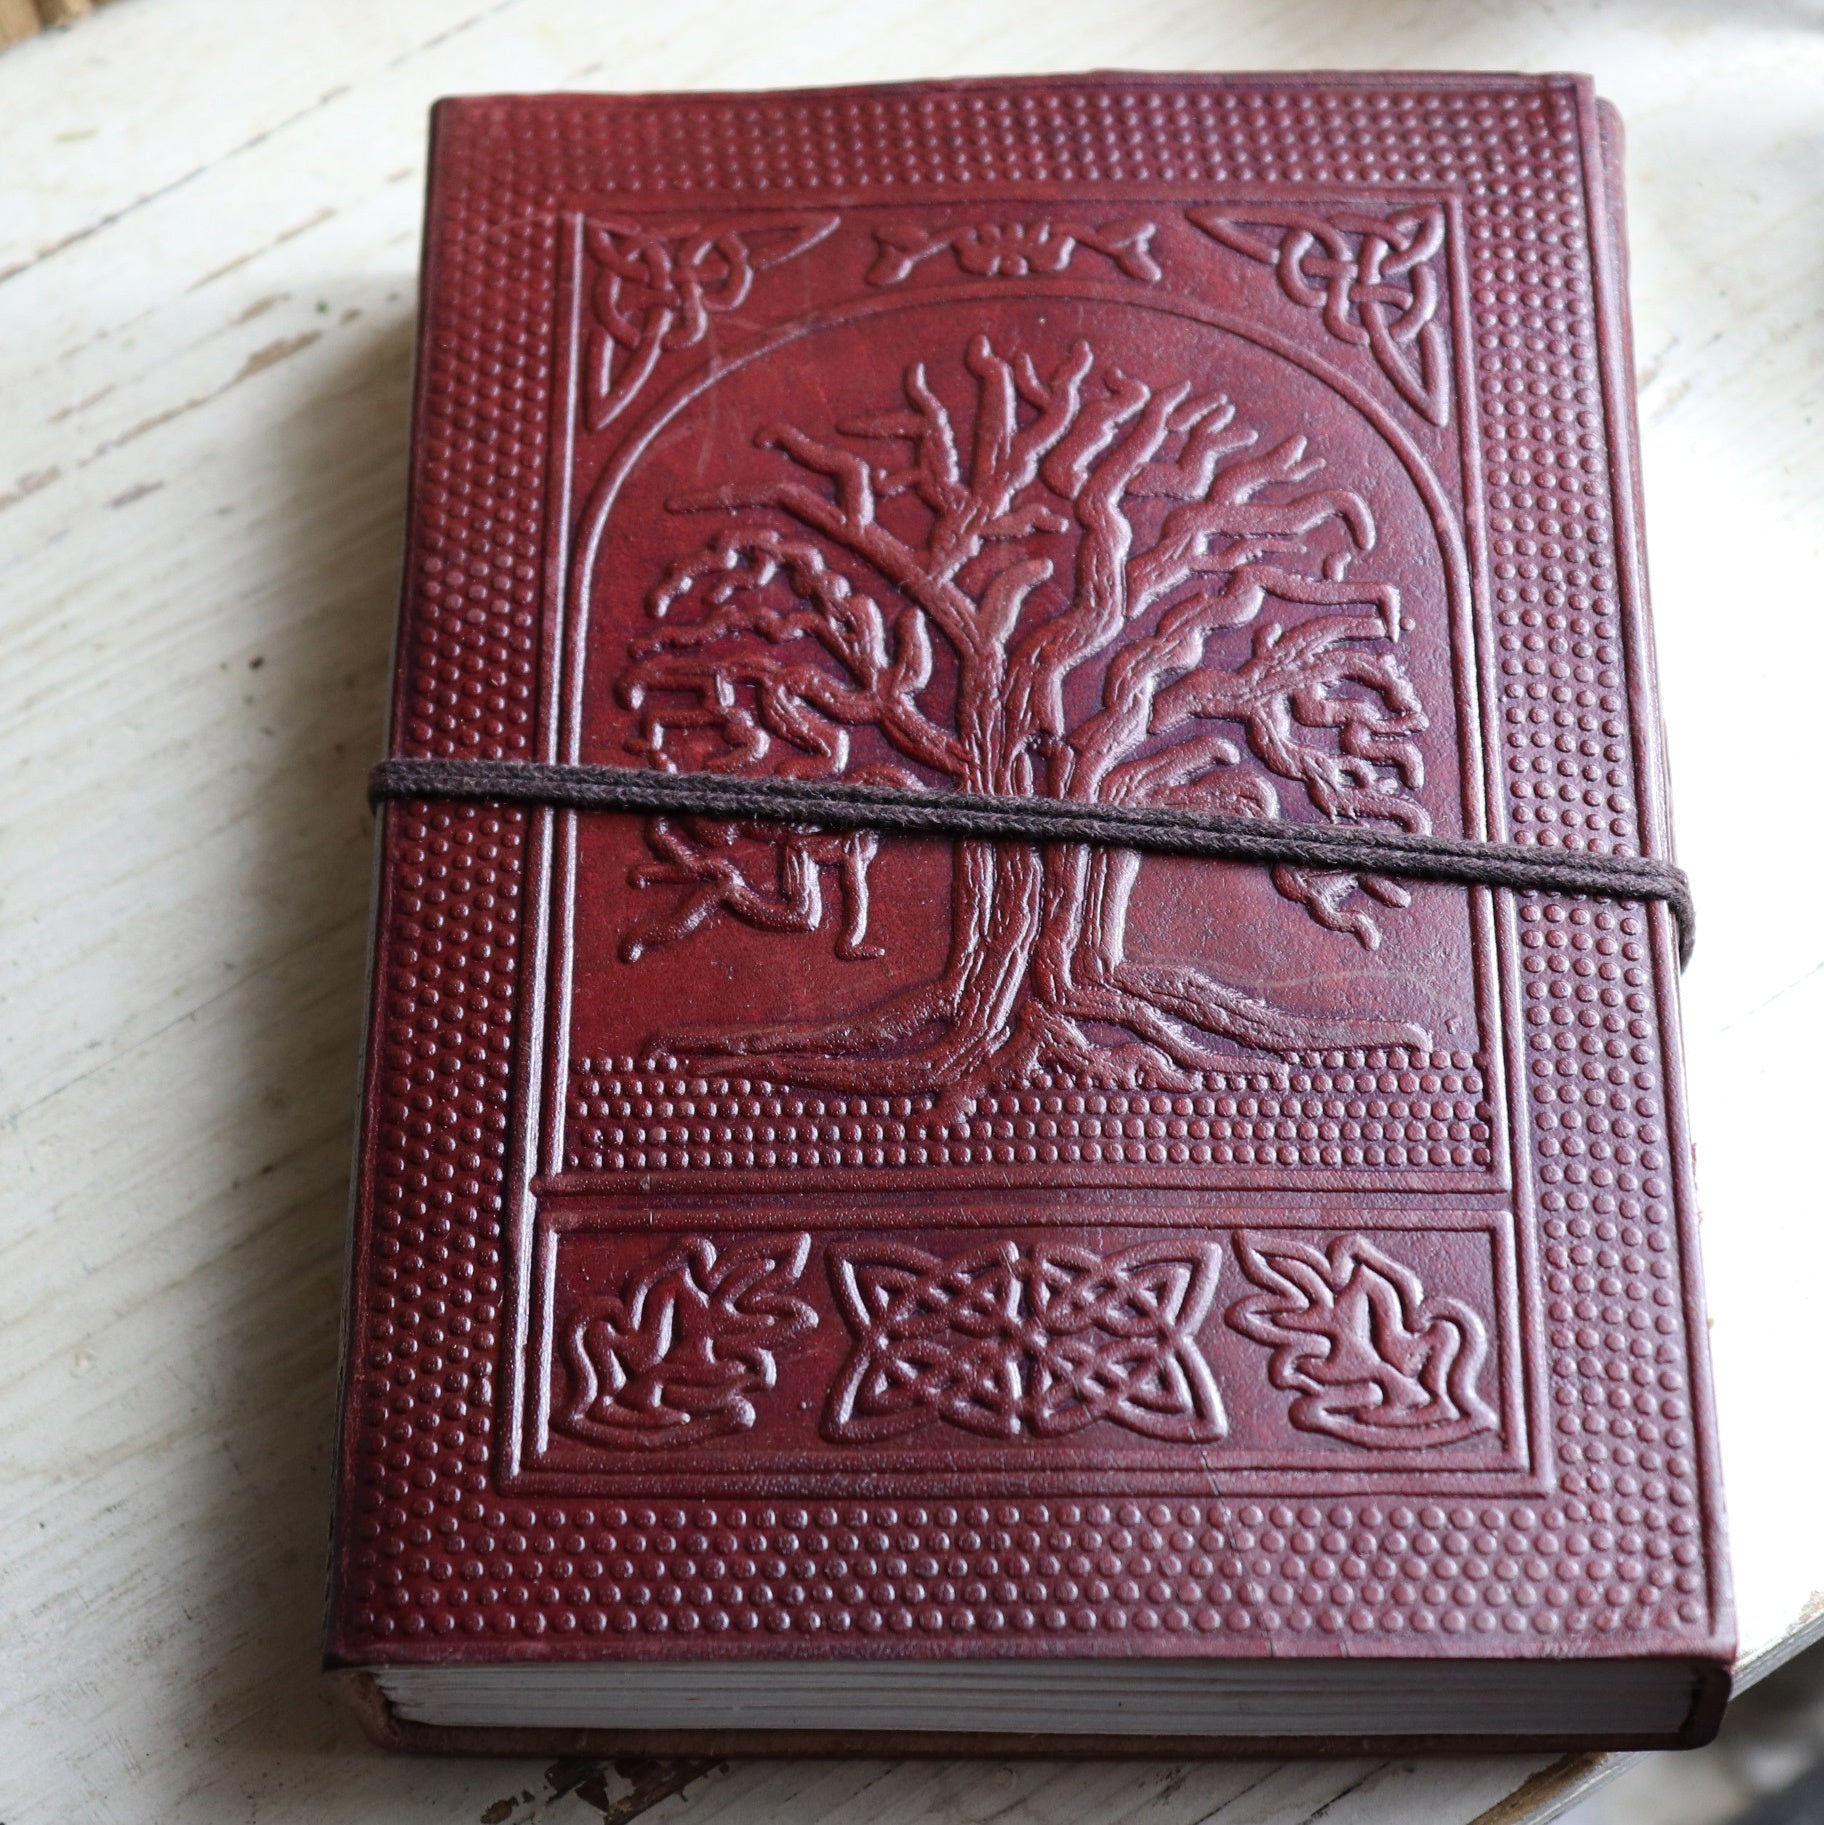 Wicca Journal Tree Of Life spell book 5"*7" - The Spirit of Life